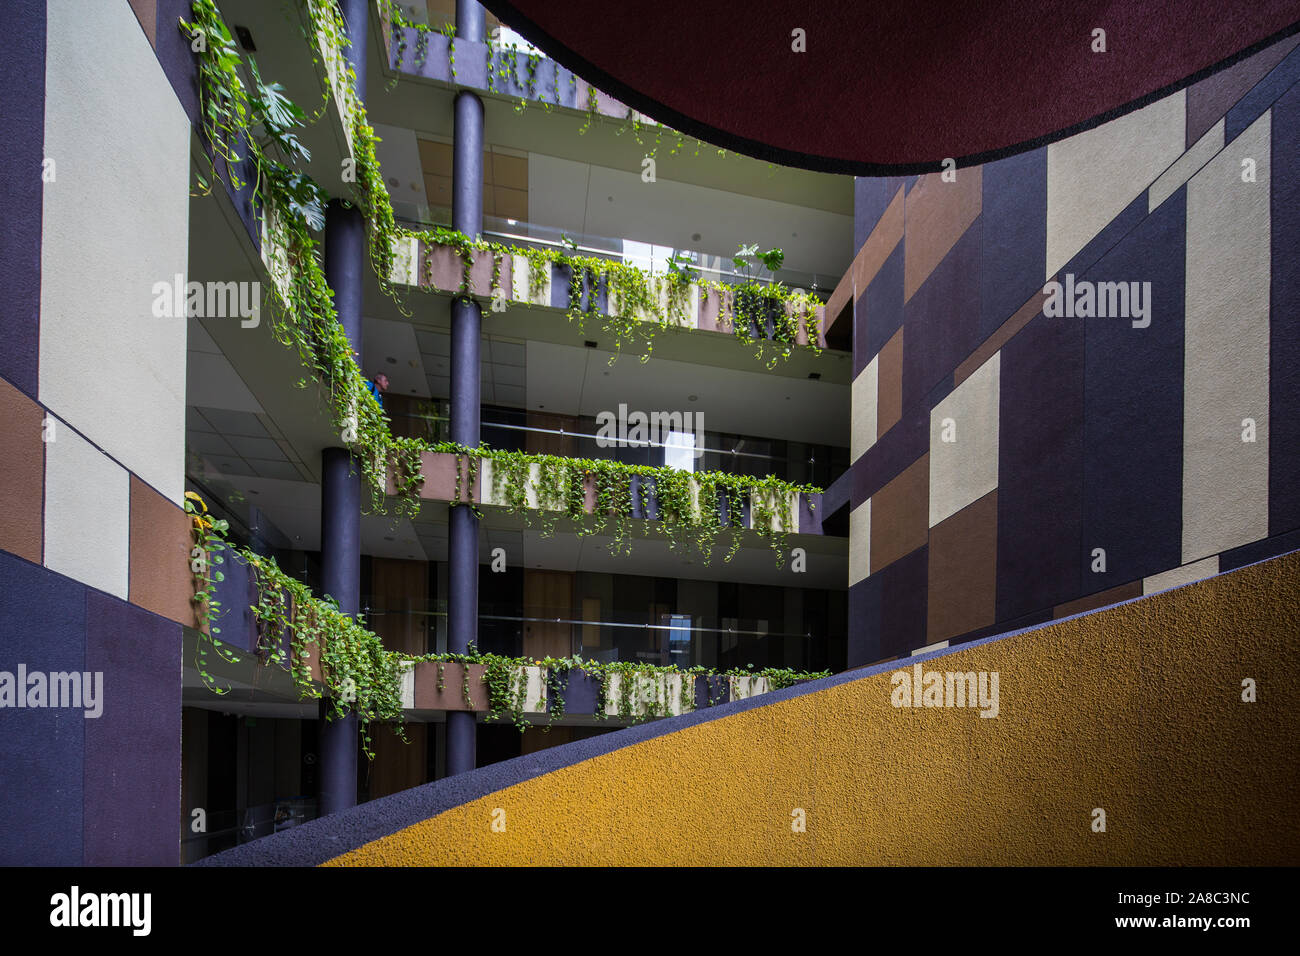 Common area of Crowne Plaza hotel premises in Changi Airport T3, Singapore Stock Photo